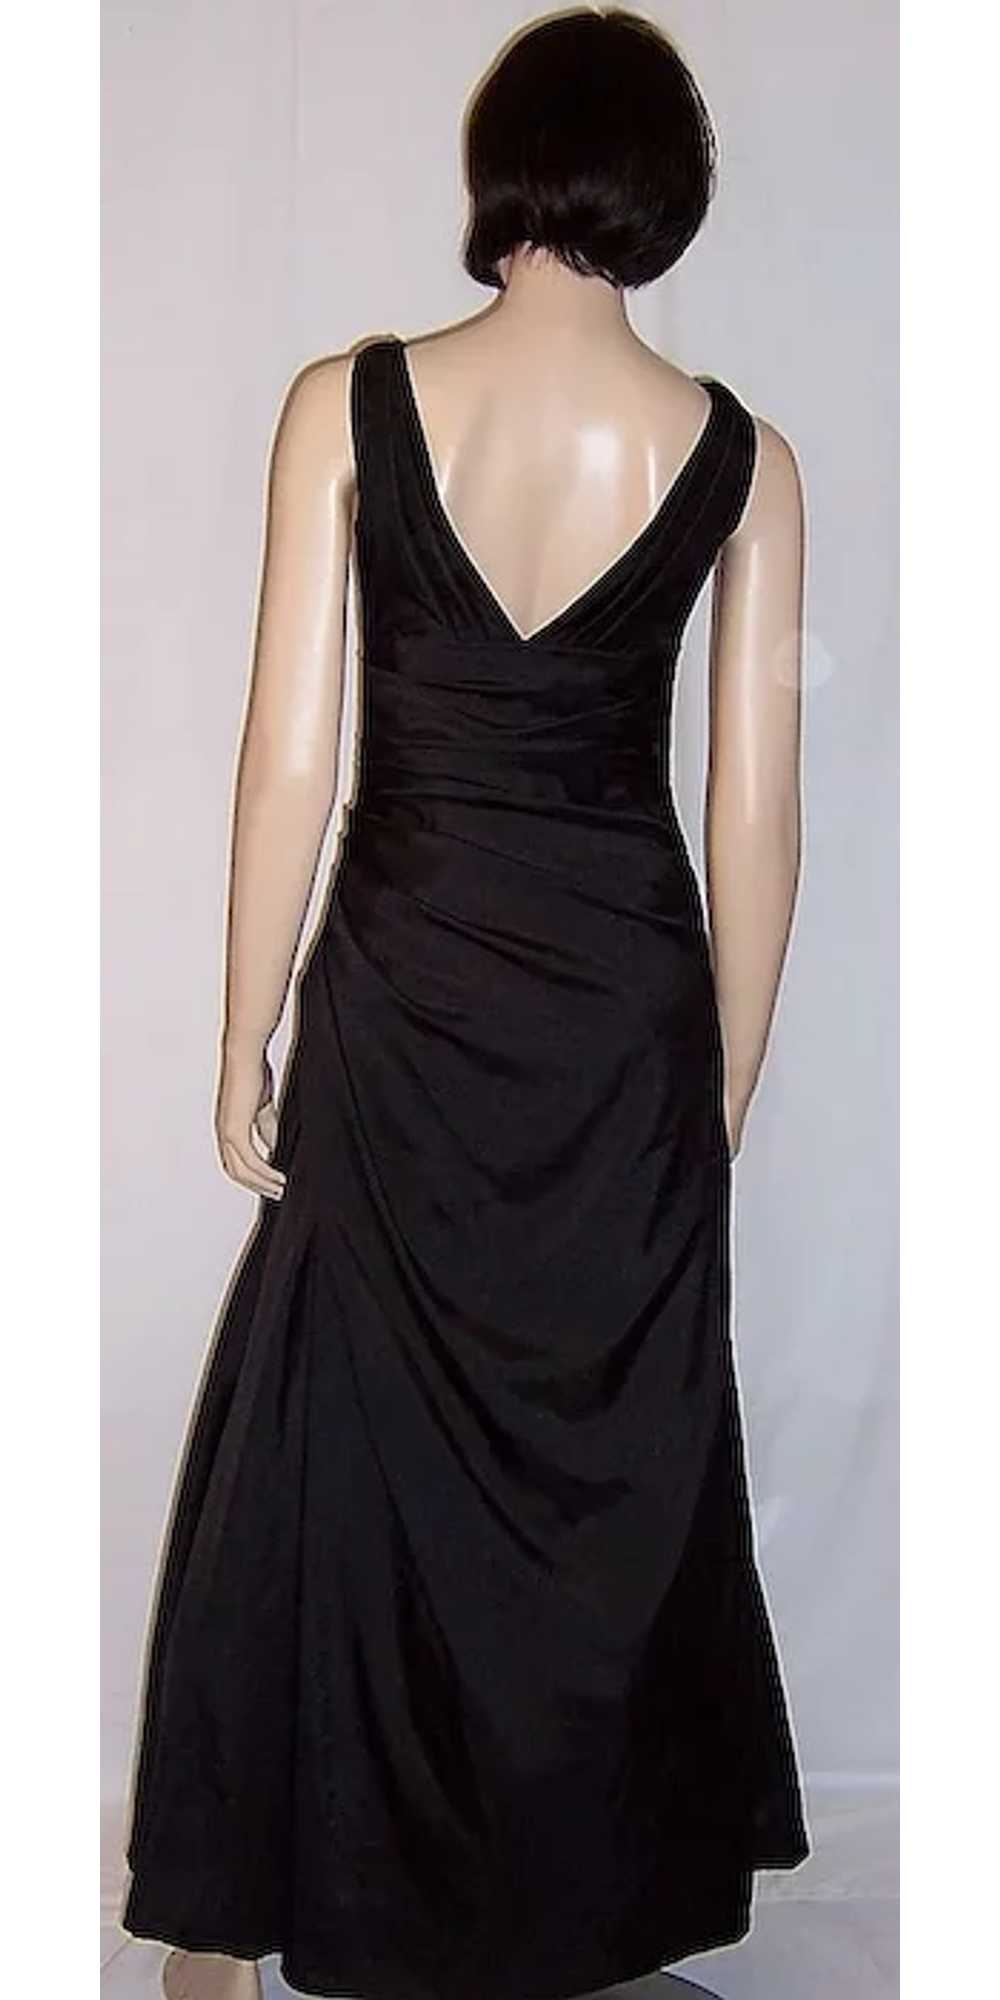 Black Sleeveless Floor Length Gown with Ruching - image 3